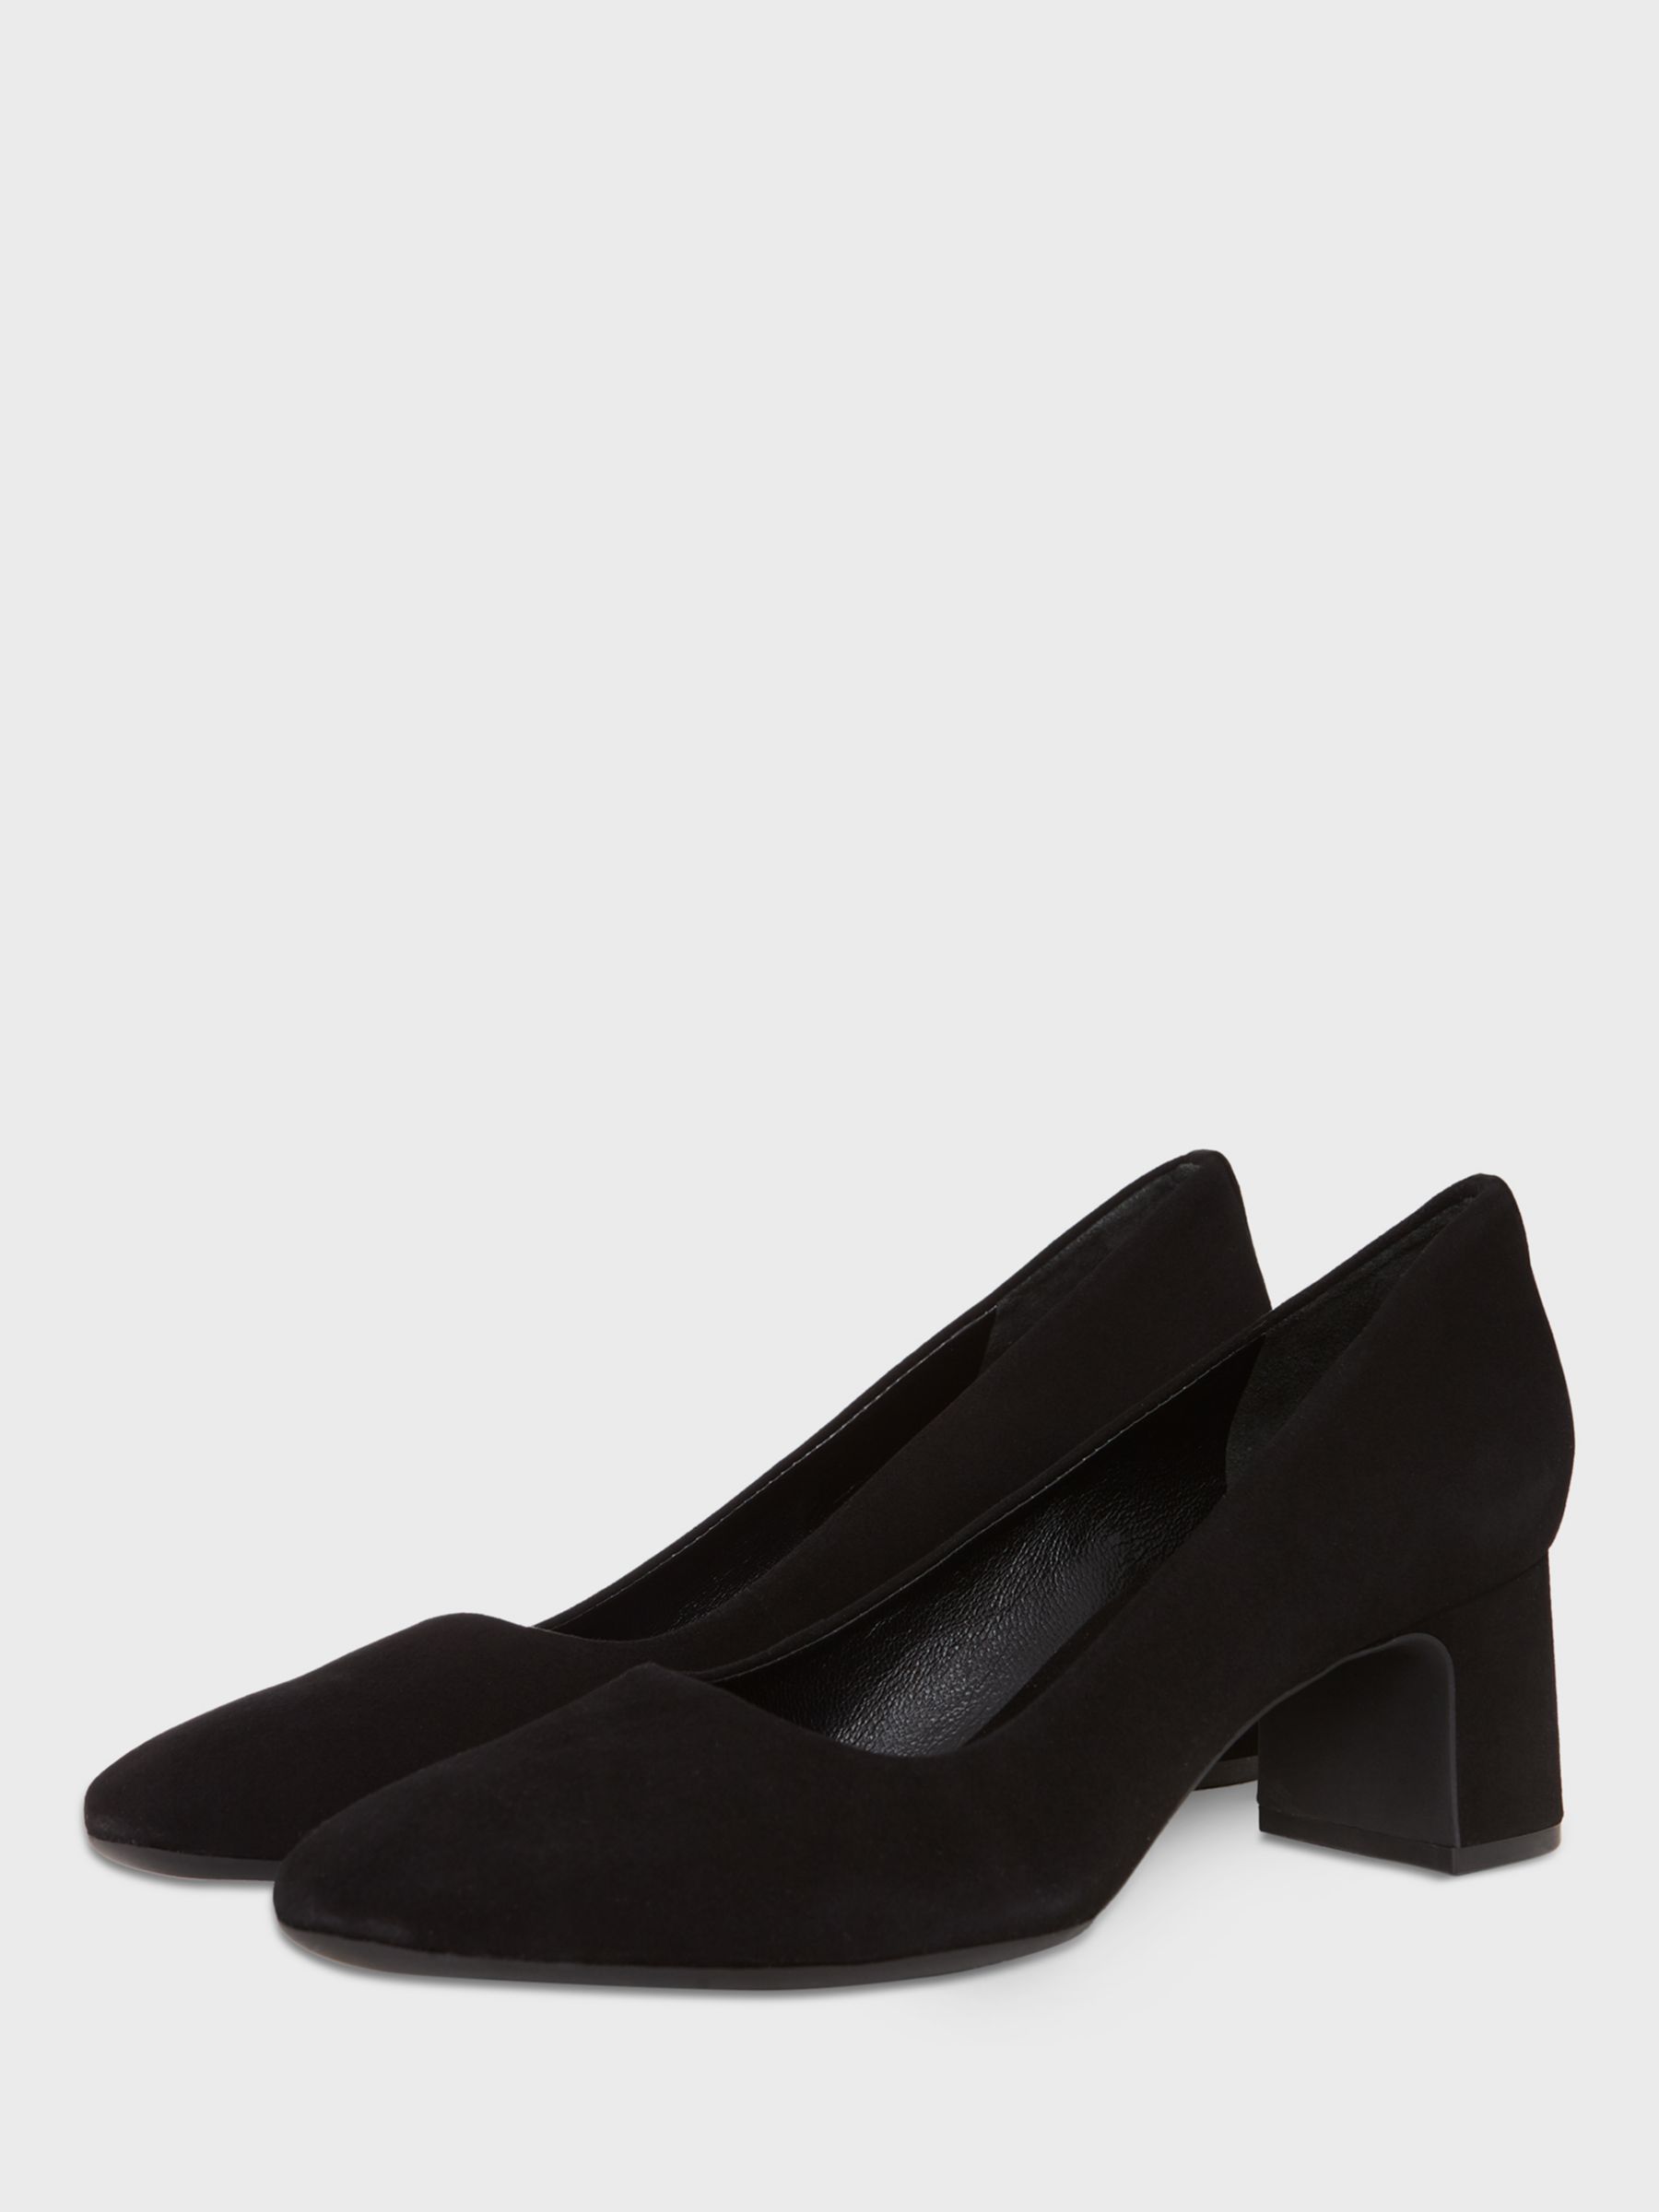 Hobbs Clemmi Suede Shoes, Black at John Lewis & Partners